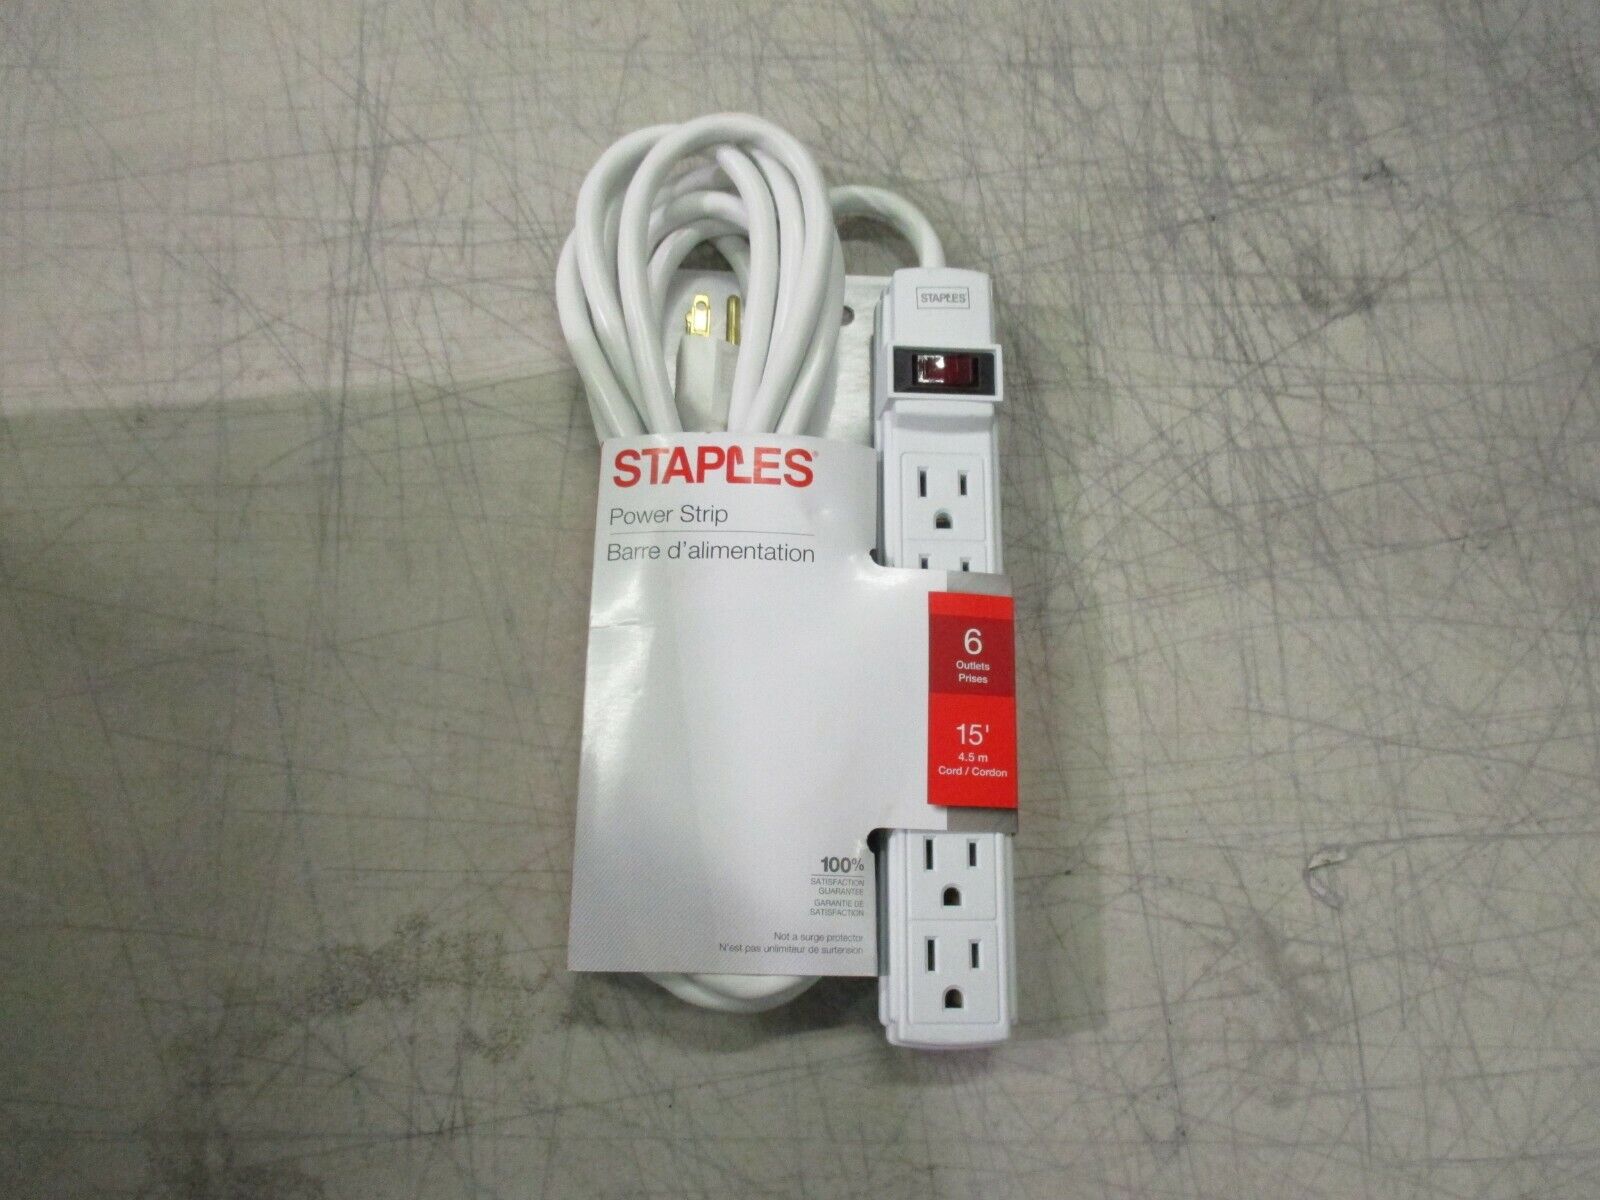 6 Outlet Power Strip Grounded 15A 125V 15' Brand New